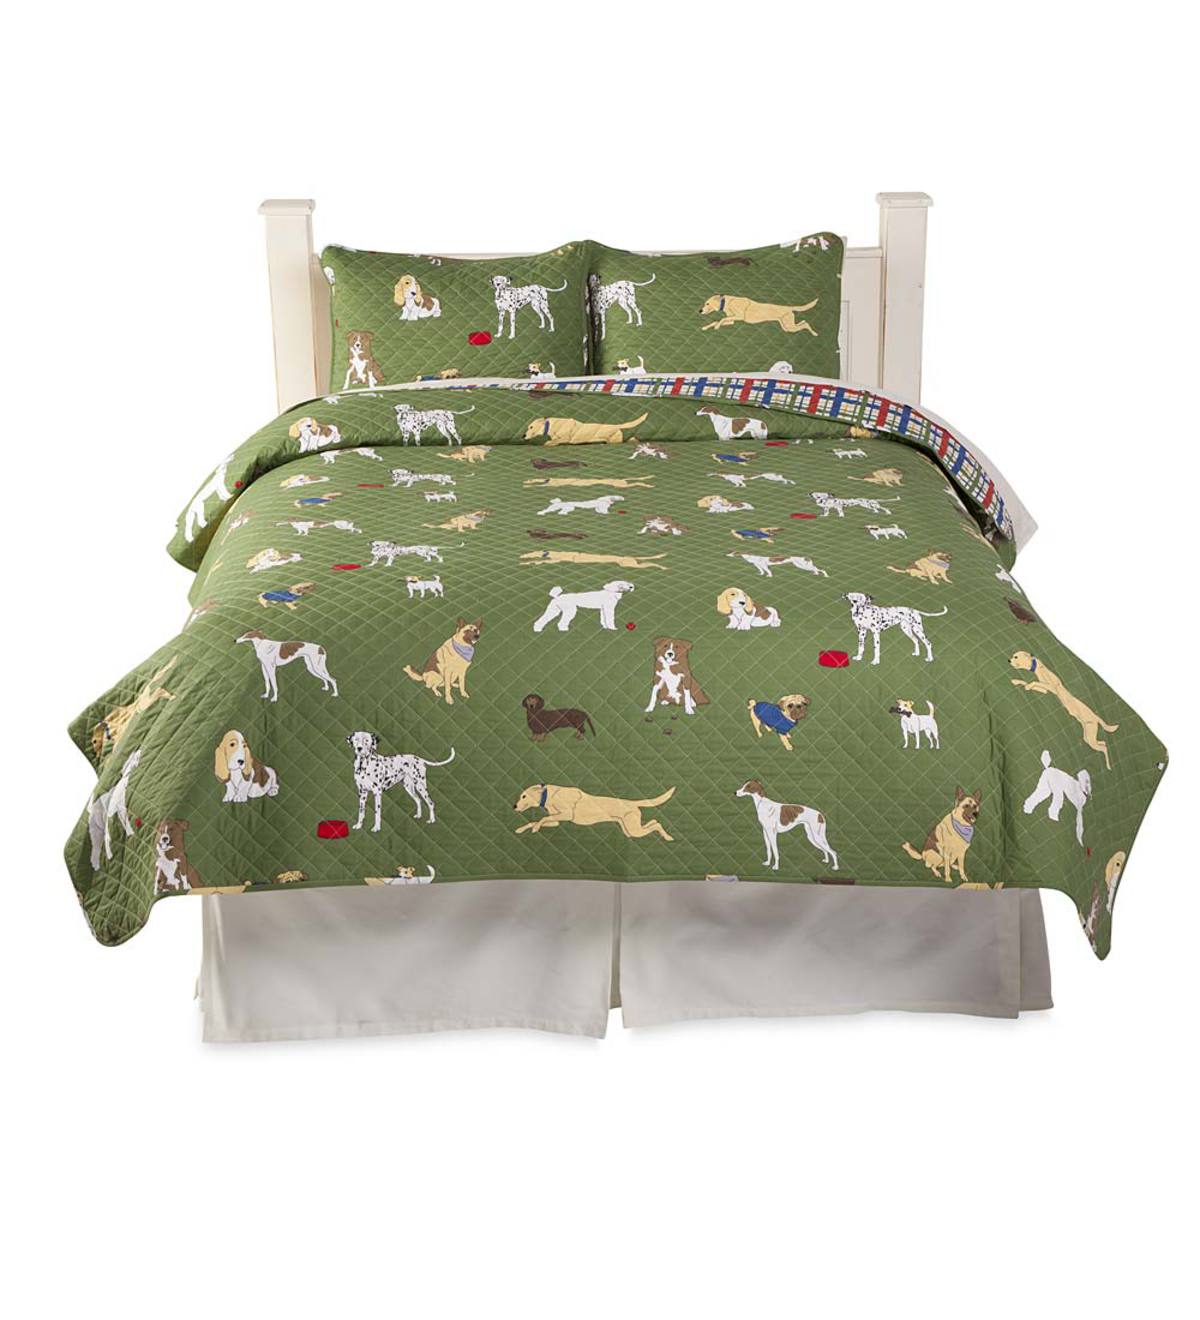 King Bedtime Tails Dog Print Quilt Set Plowhearth